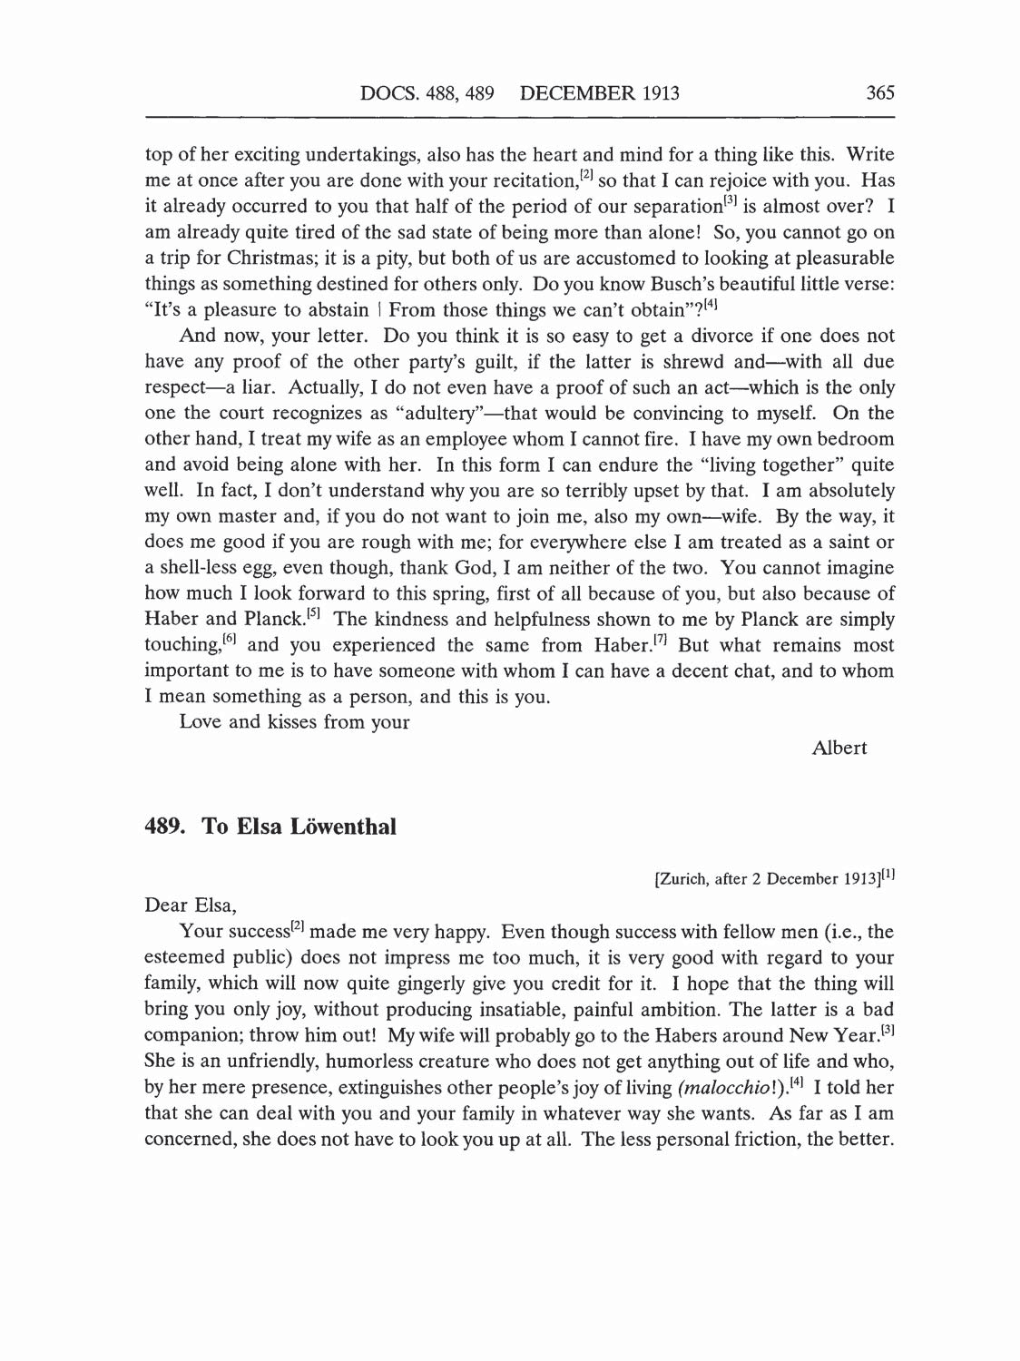 Volume 5: The Swiss Years: Correspondence, 1902-1914 (English translation supplement) page 365